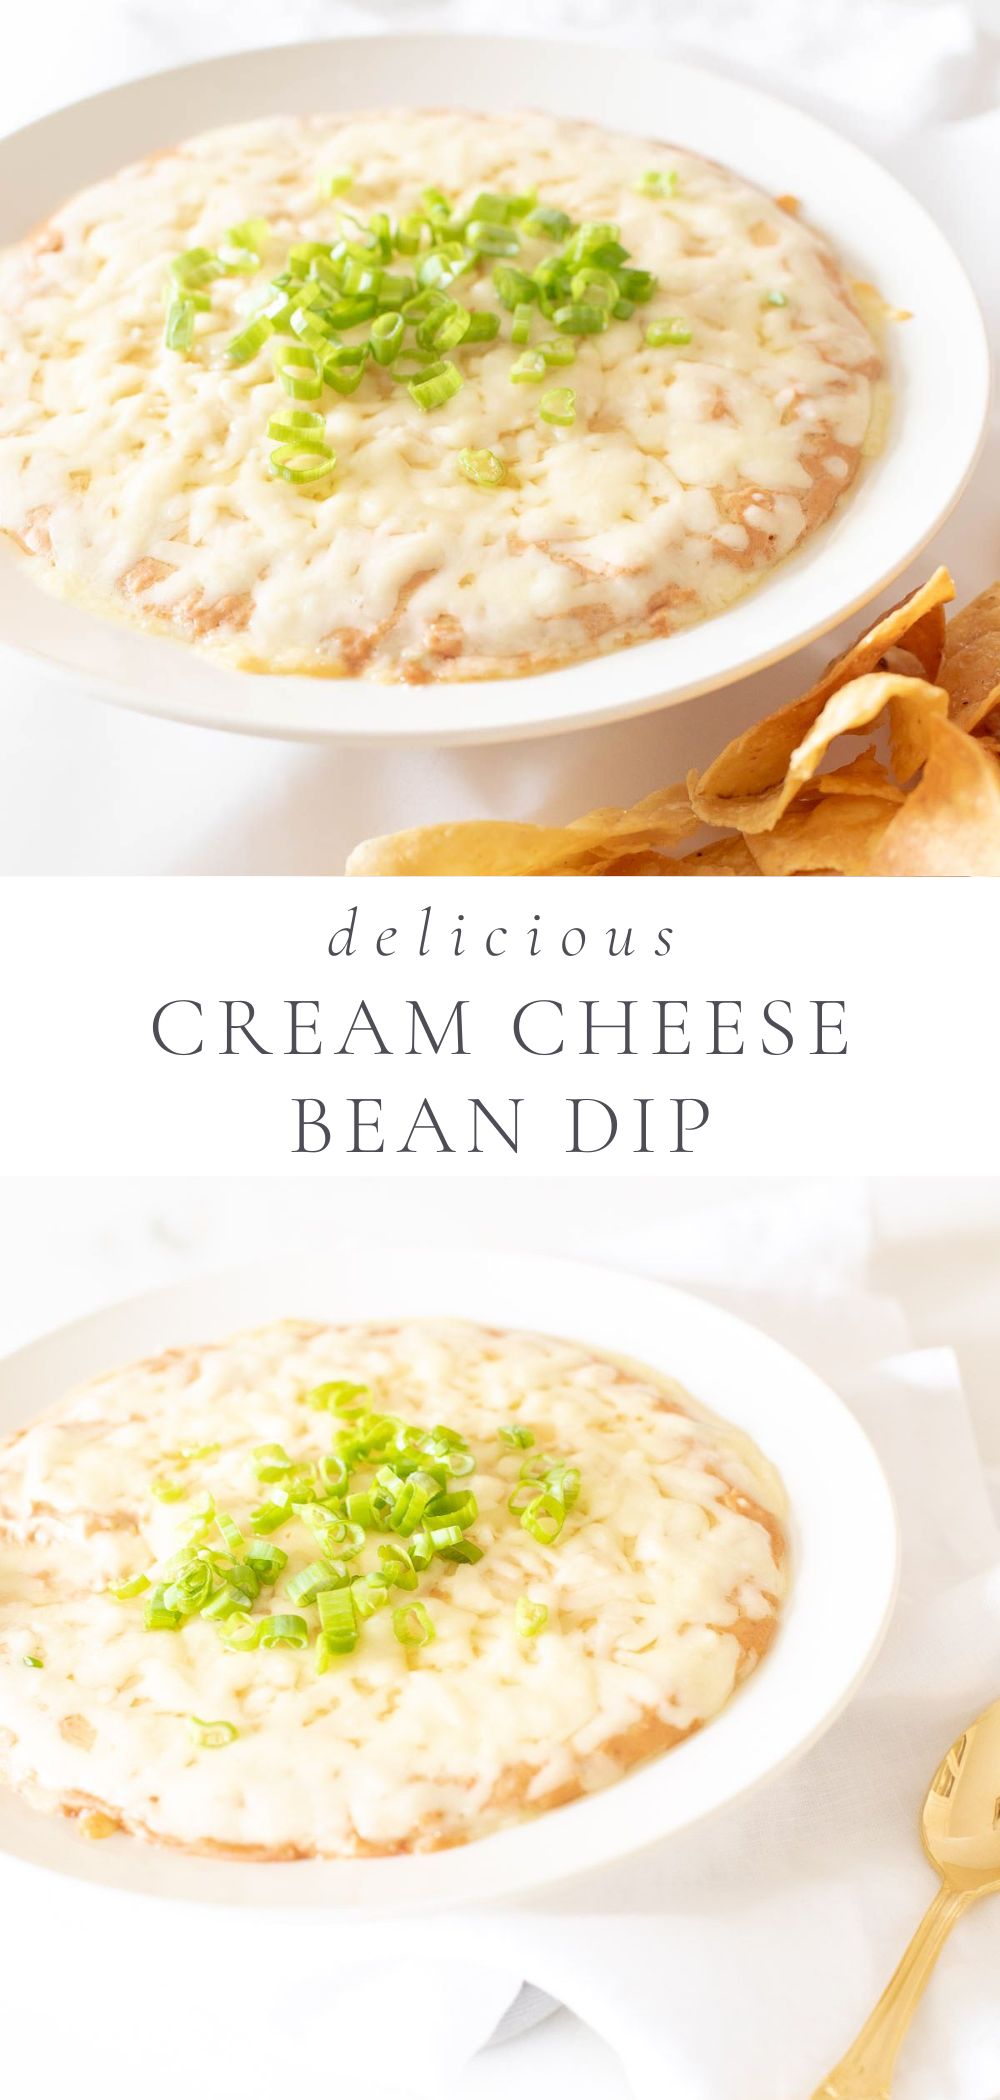 two pictures of a bowl of cream cheese bean dip with chips and a spoon